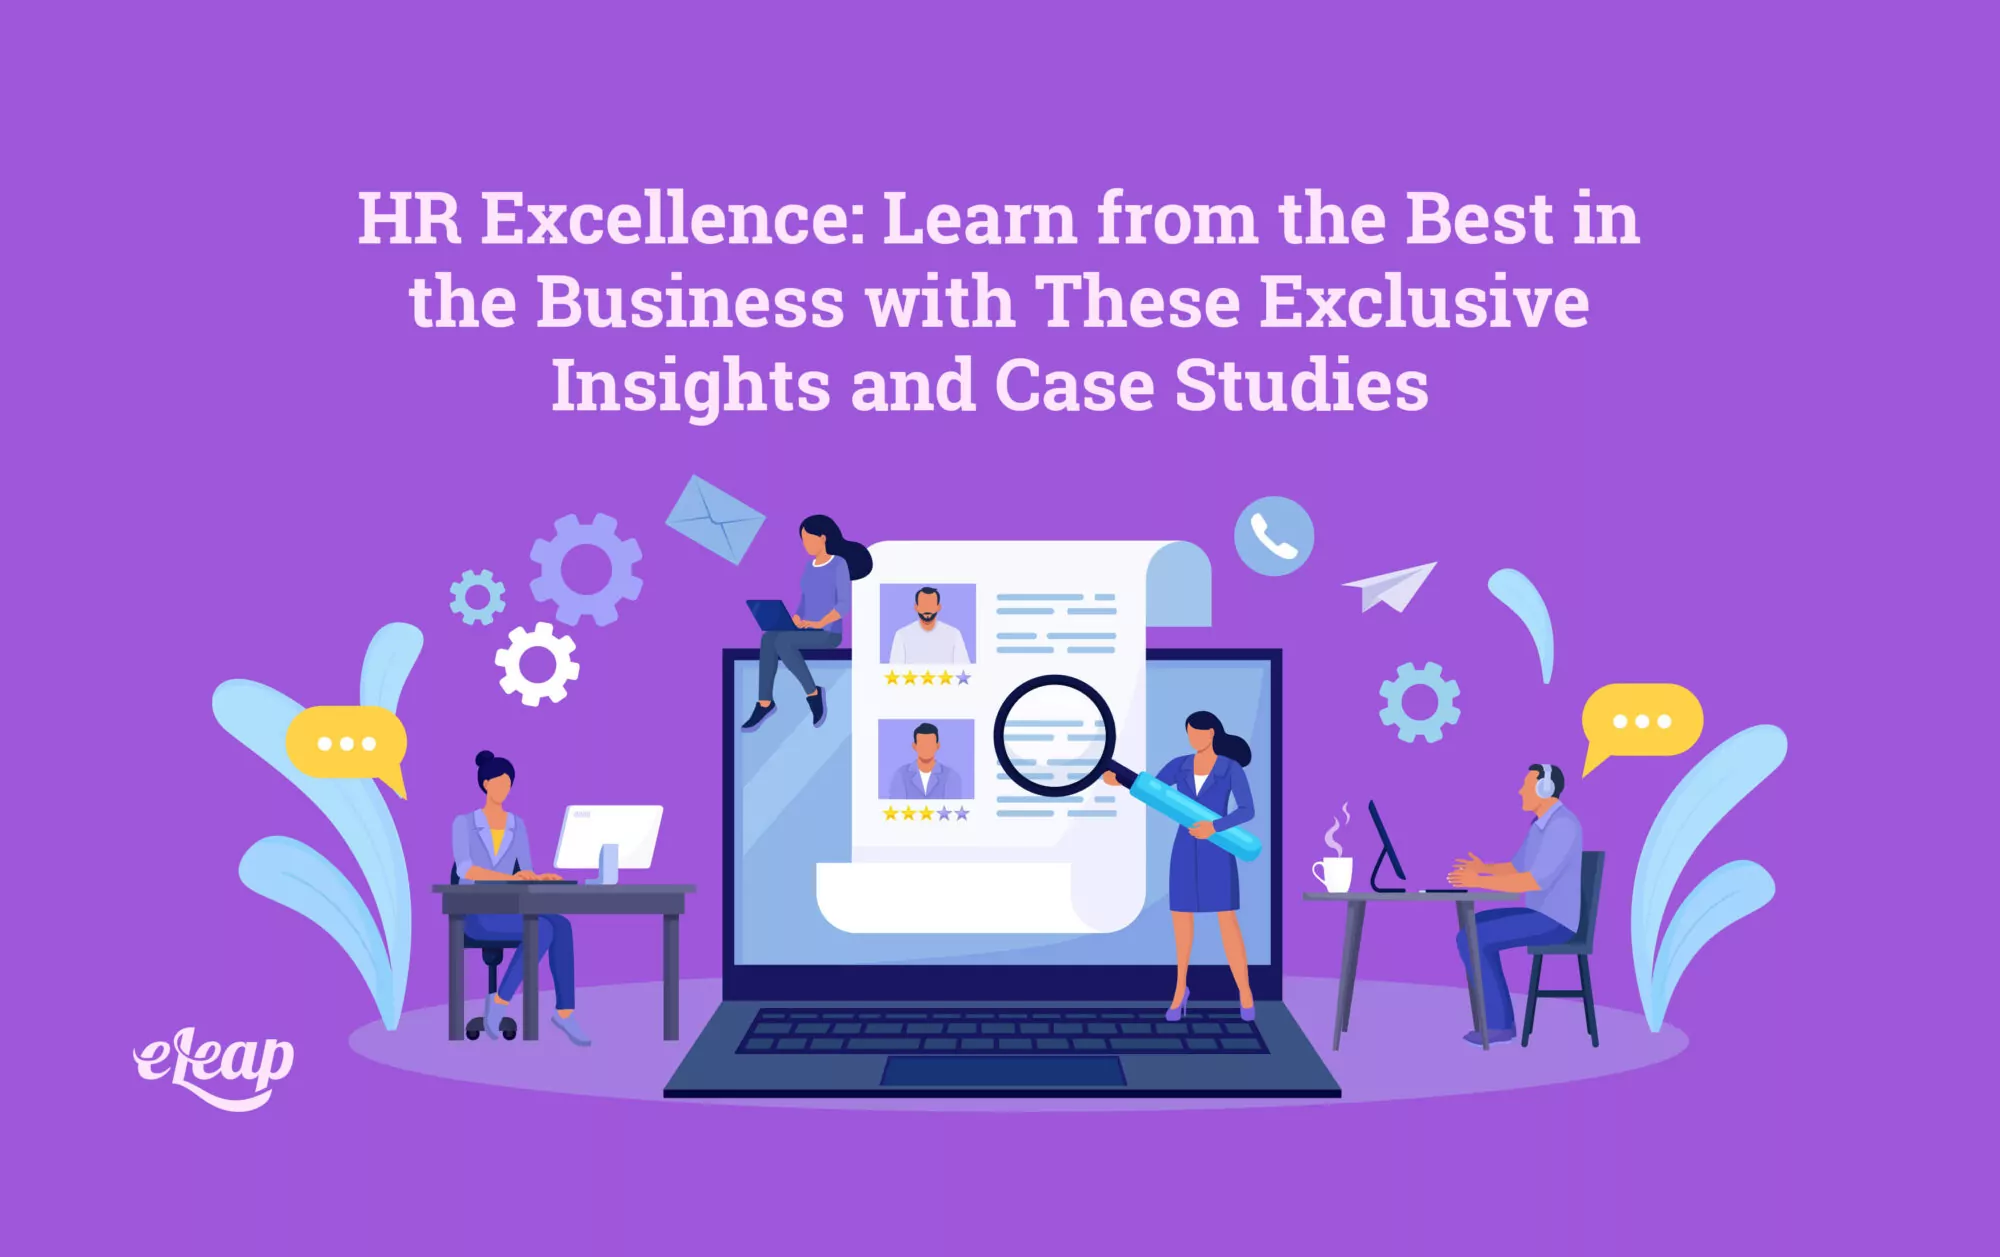 HR Excellence: Learn from the Best in the Business with These Exclusive Insights and Case Studies